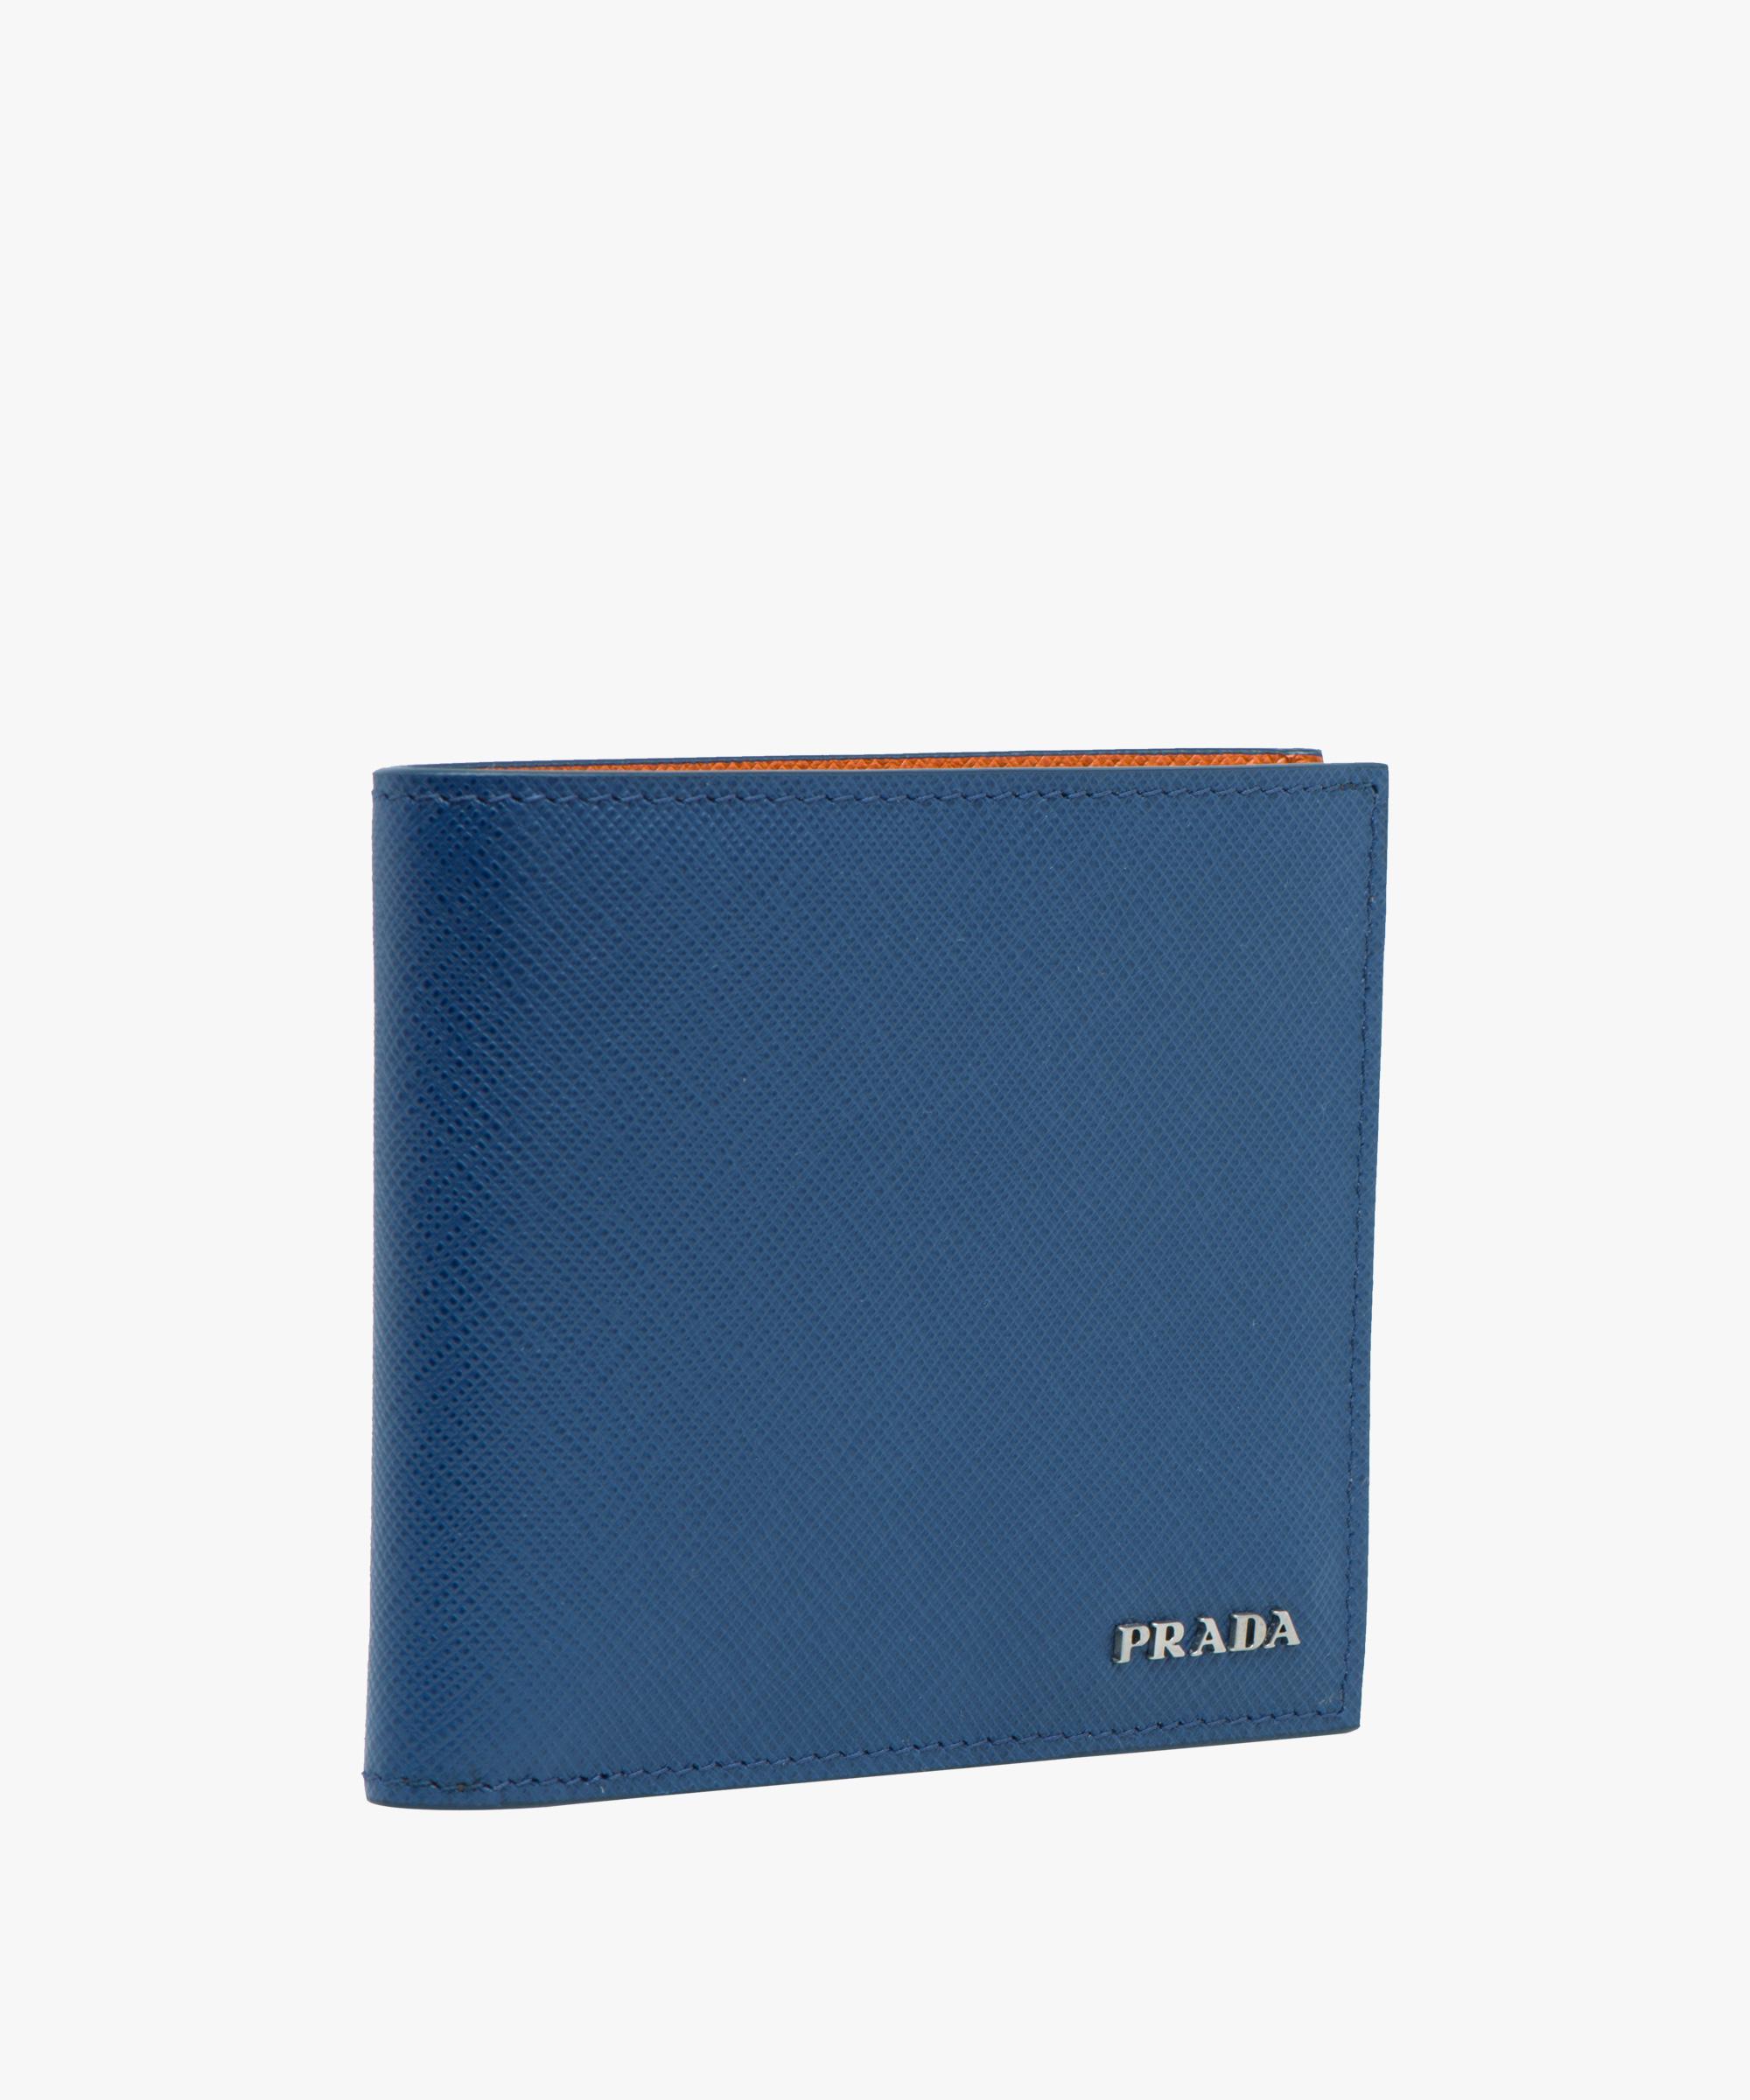 Prada Saffiano Leather Wallet in Blue for Men | Lyst